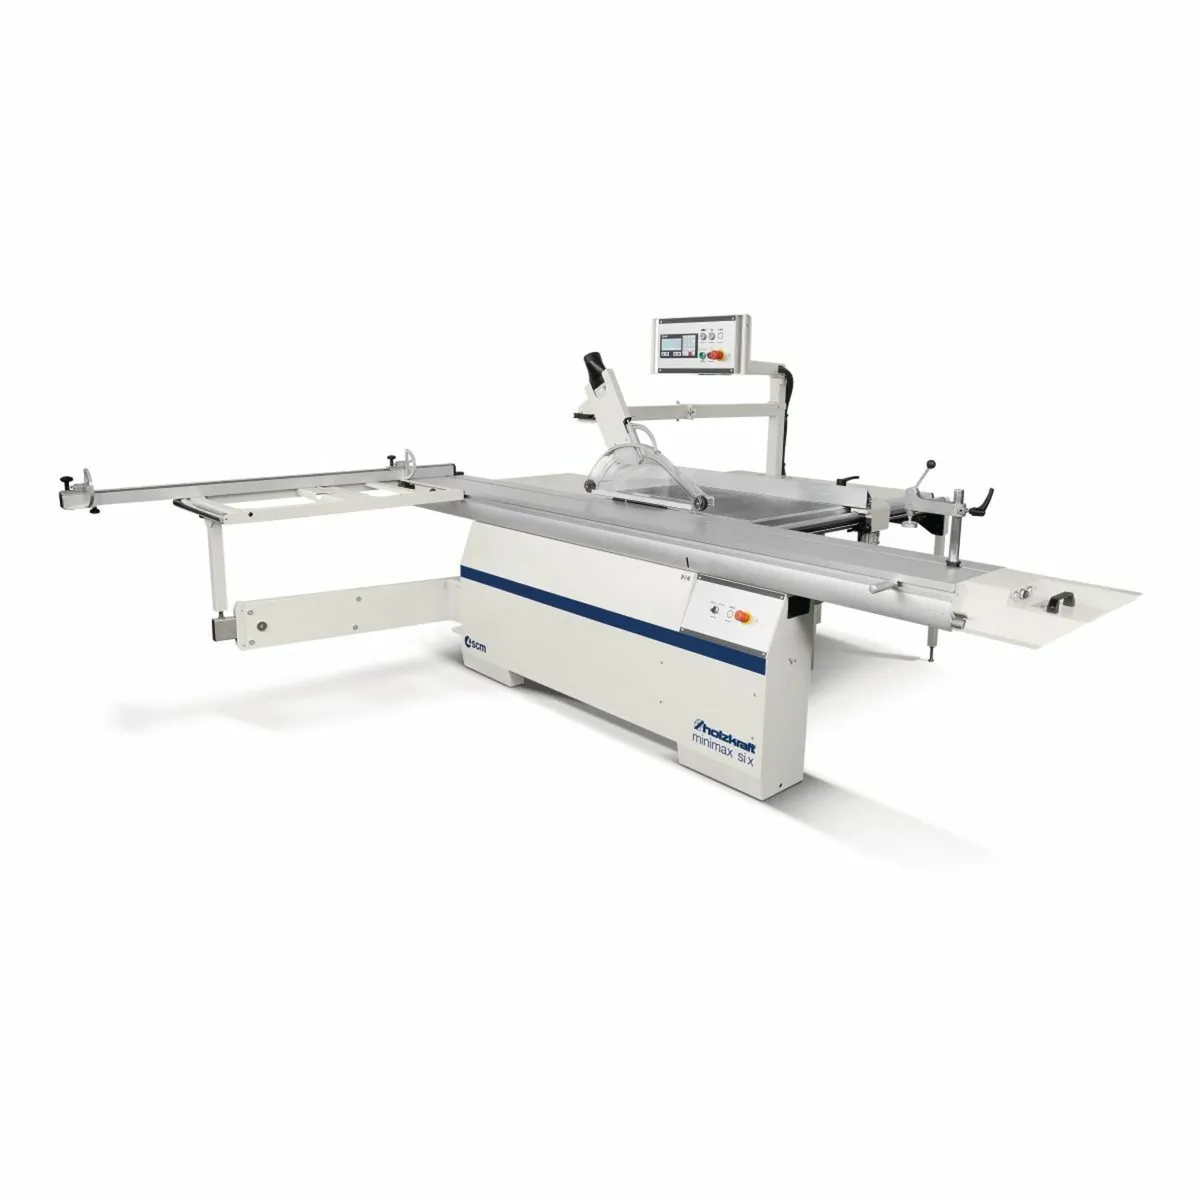 Minimax Sliding Table Saw - Special Offer